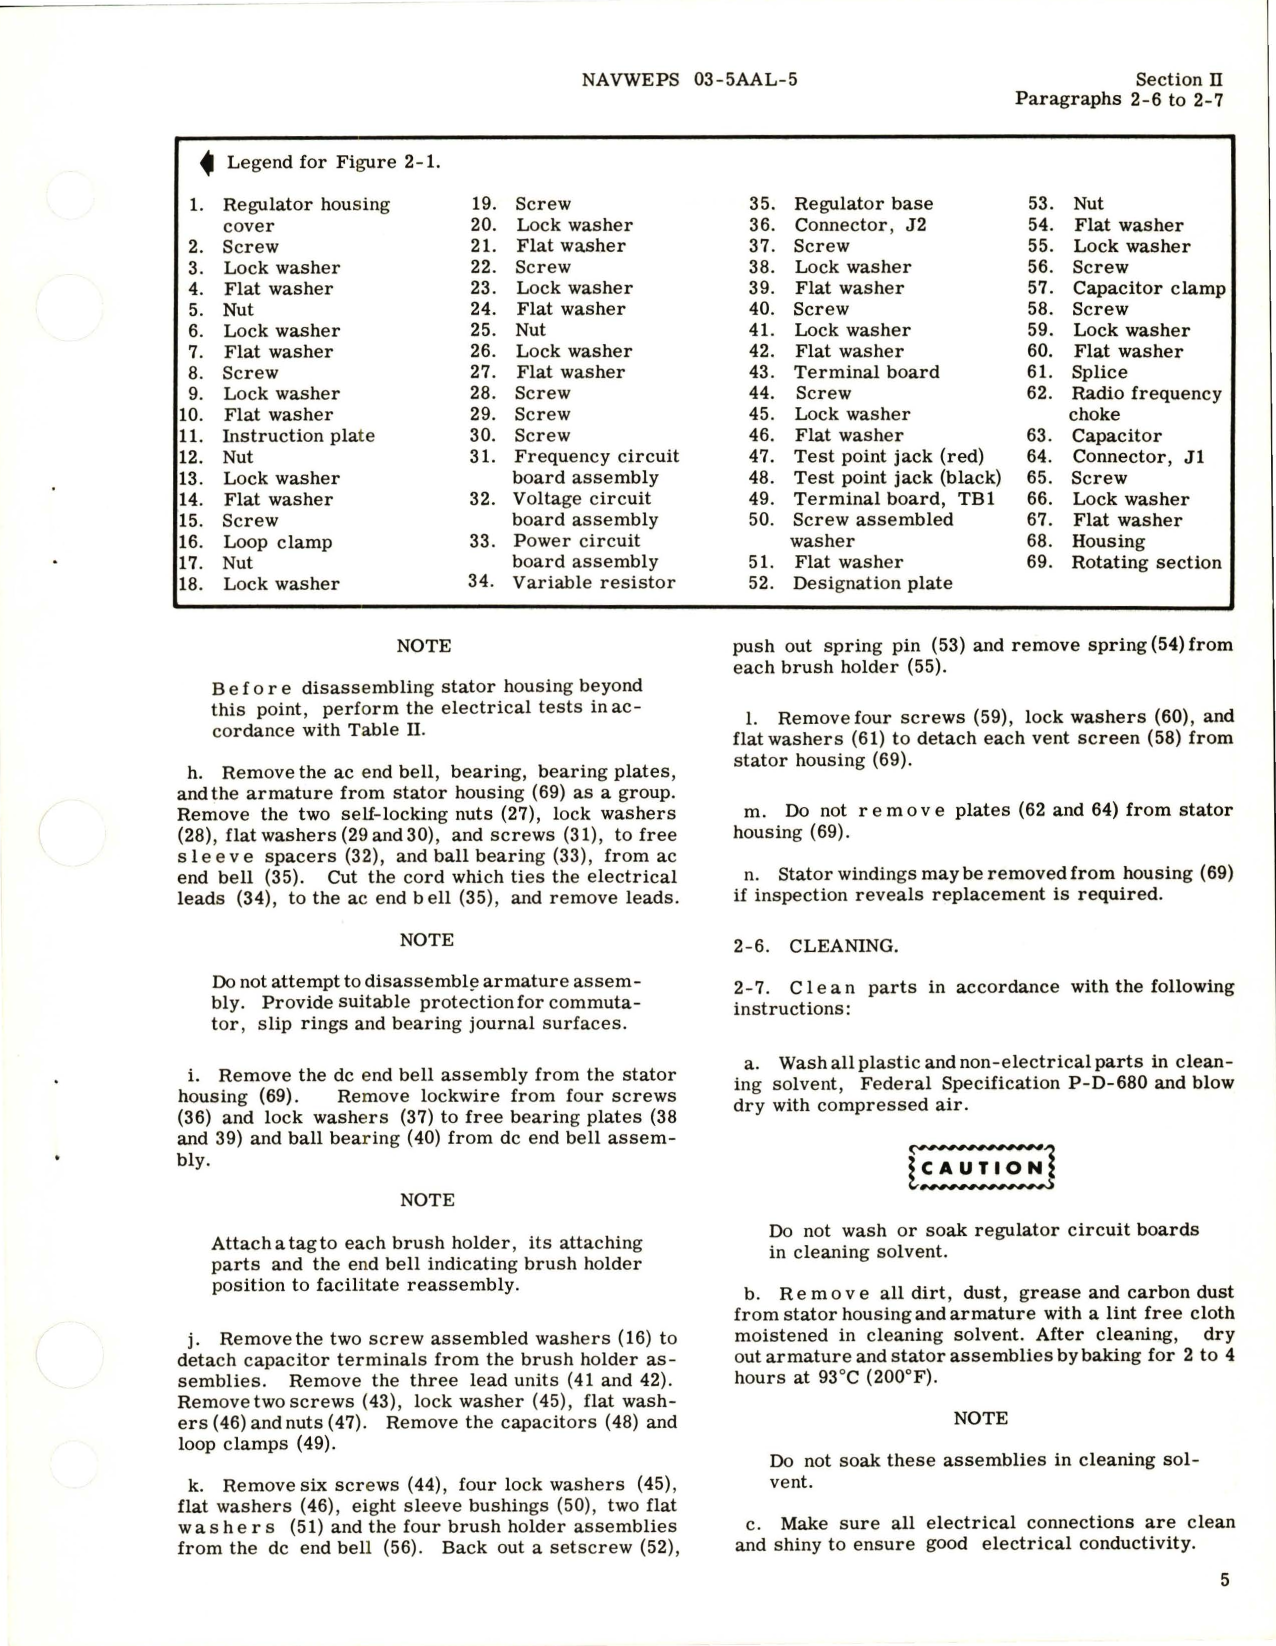 Sample page 9 from AirCorps Library document: Overhaul Instructions for Motor Generator - Part MGH182-100